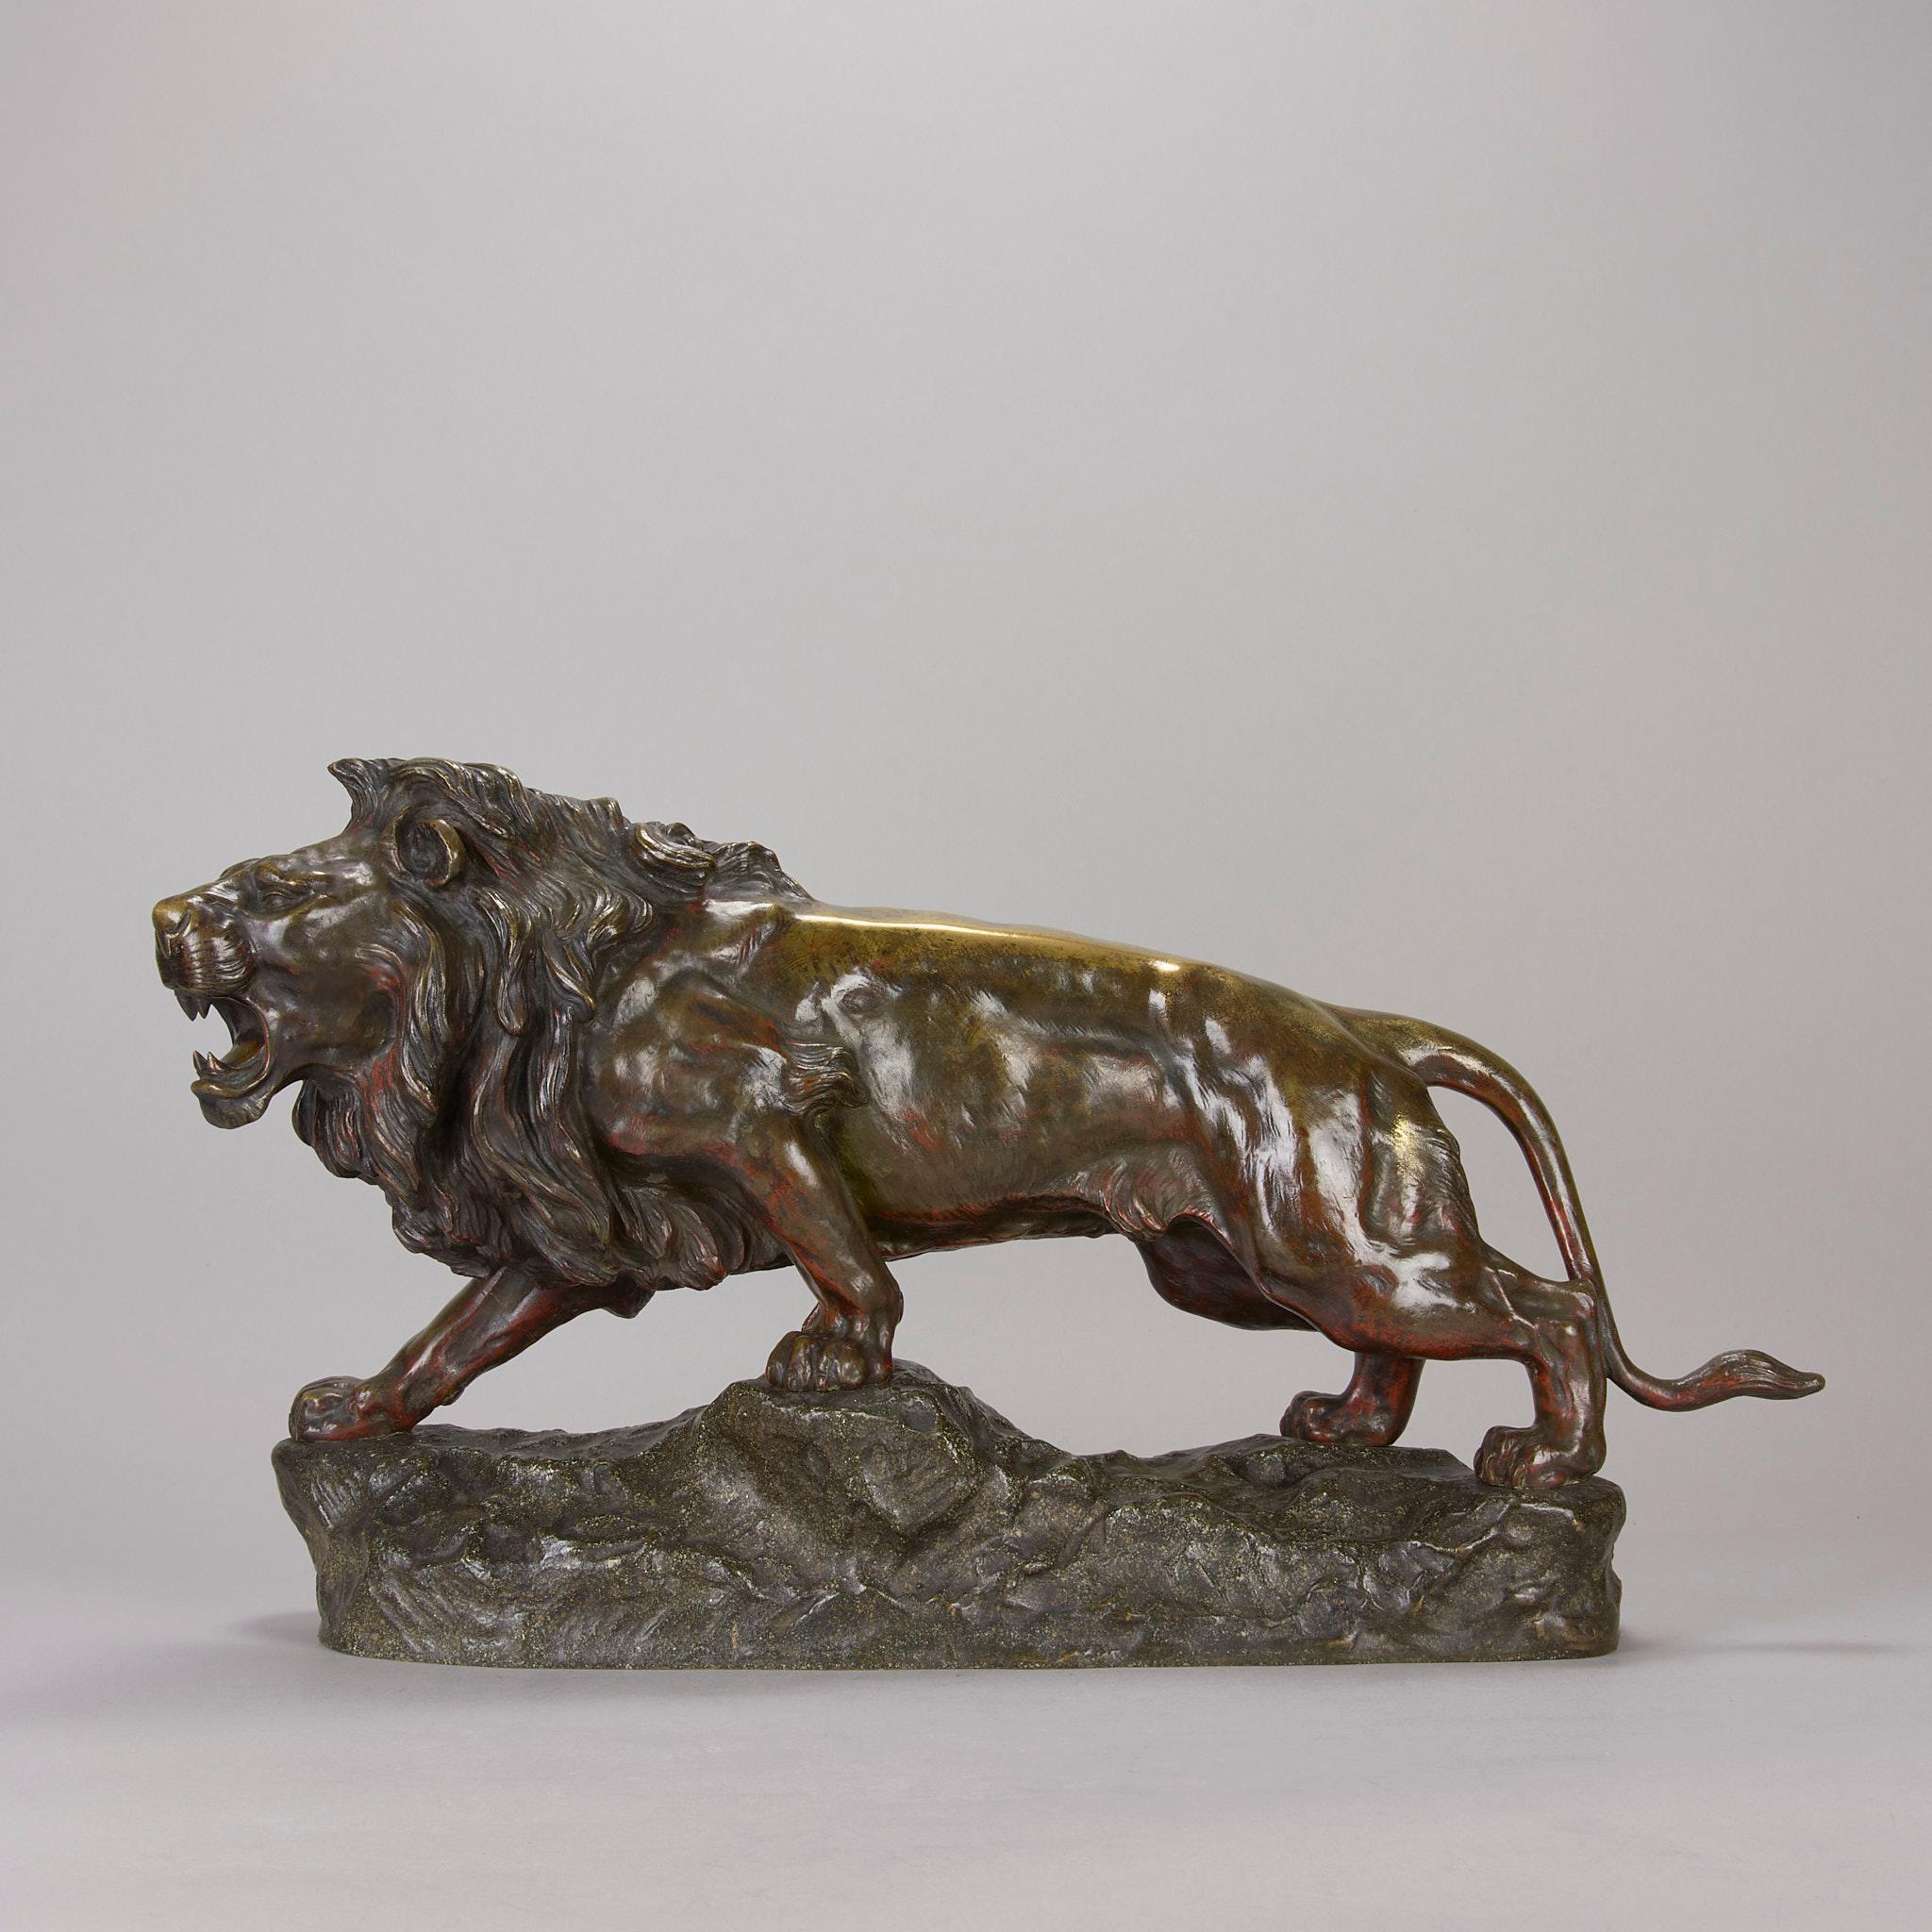 A large and impressive early 20th Century bronze study of a walking lion with fine deep brown, gold and orange patination and good surface detail. Raised on naturalistic bronze base, signed Joe Descomps 

Additional Information

Height: 30